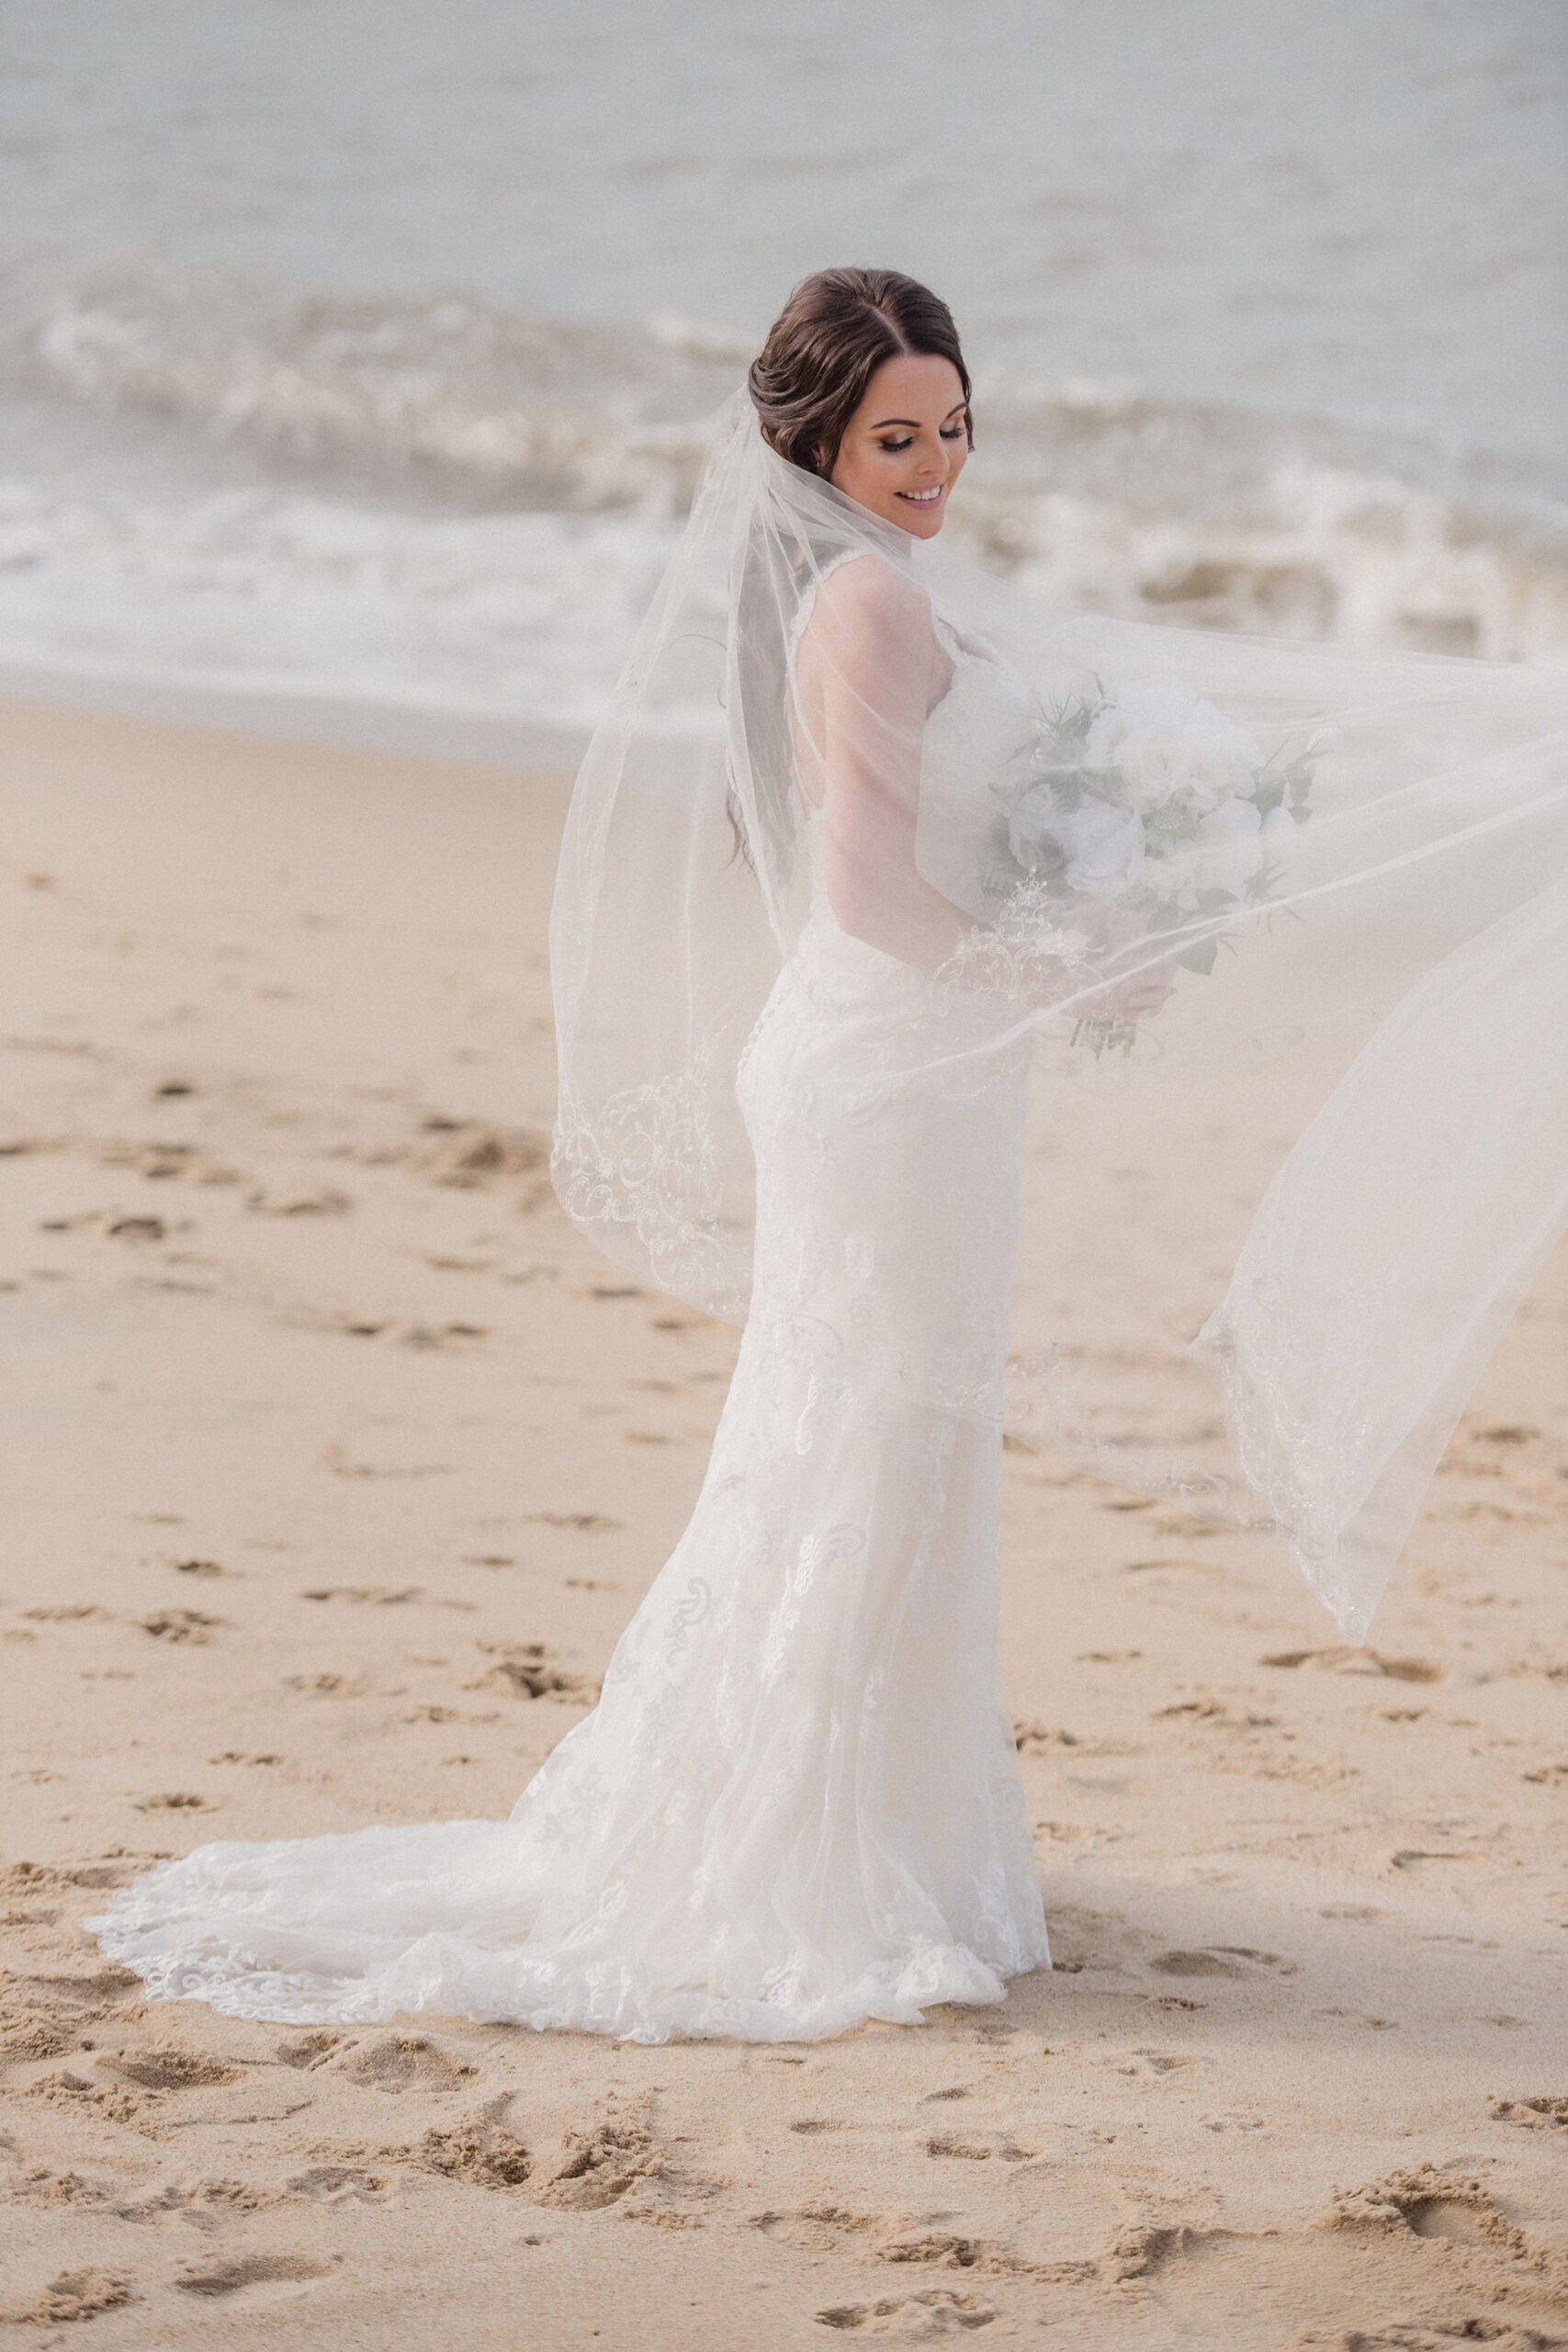 April Conor Classic Sea side Wedding Focus Imagery SBS 010 scaled